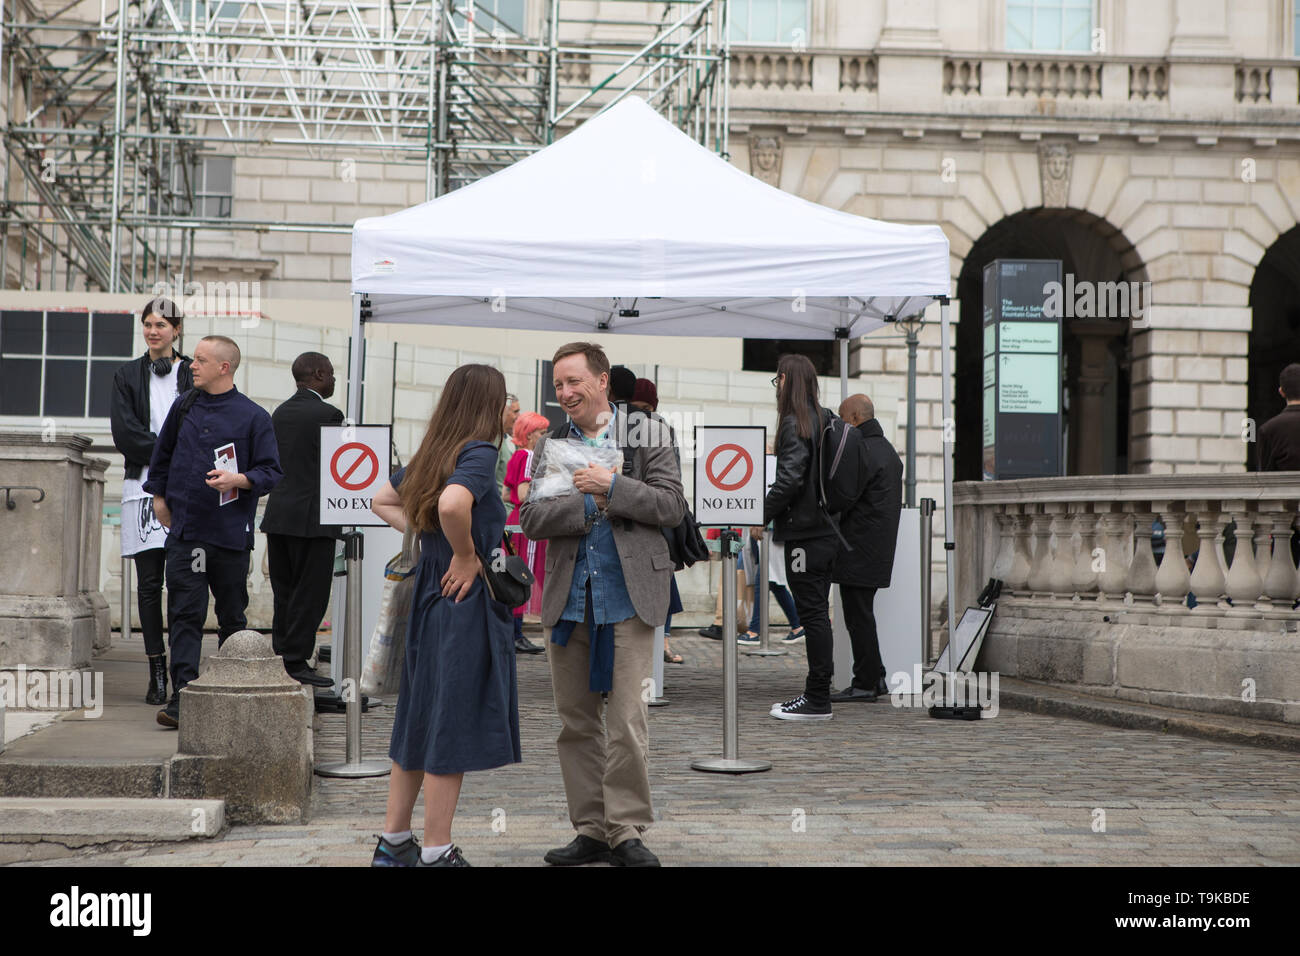 London, UK. 18 May 2019. (L-R) A visitor talks to photographer Richard Billingham at the fifth edition of Photo London at Somerset House. Over 100 galleries from 24 different countries showcase the work of past, present and future leading artists in photography. A Master of Photography exhibition dedicated to US photographer Stephen Shore.  An installation takes the theme of Women in Photography, celebrating the work of three established women photographers – Rachel L. Brown, Mary McCartney and Susan Meiselas. A discovery section focus on new and emerging talent. Stock Photo